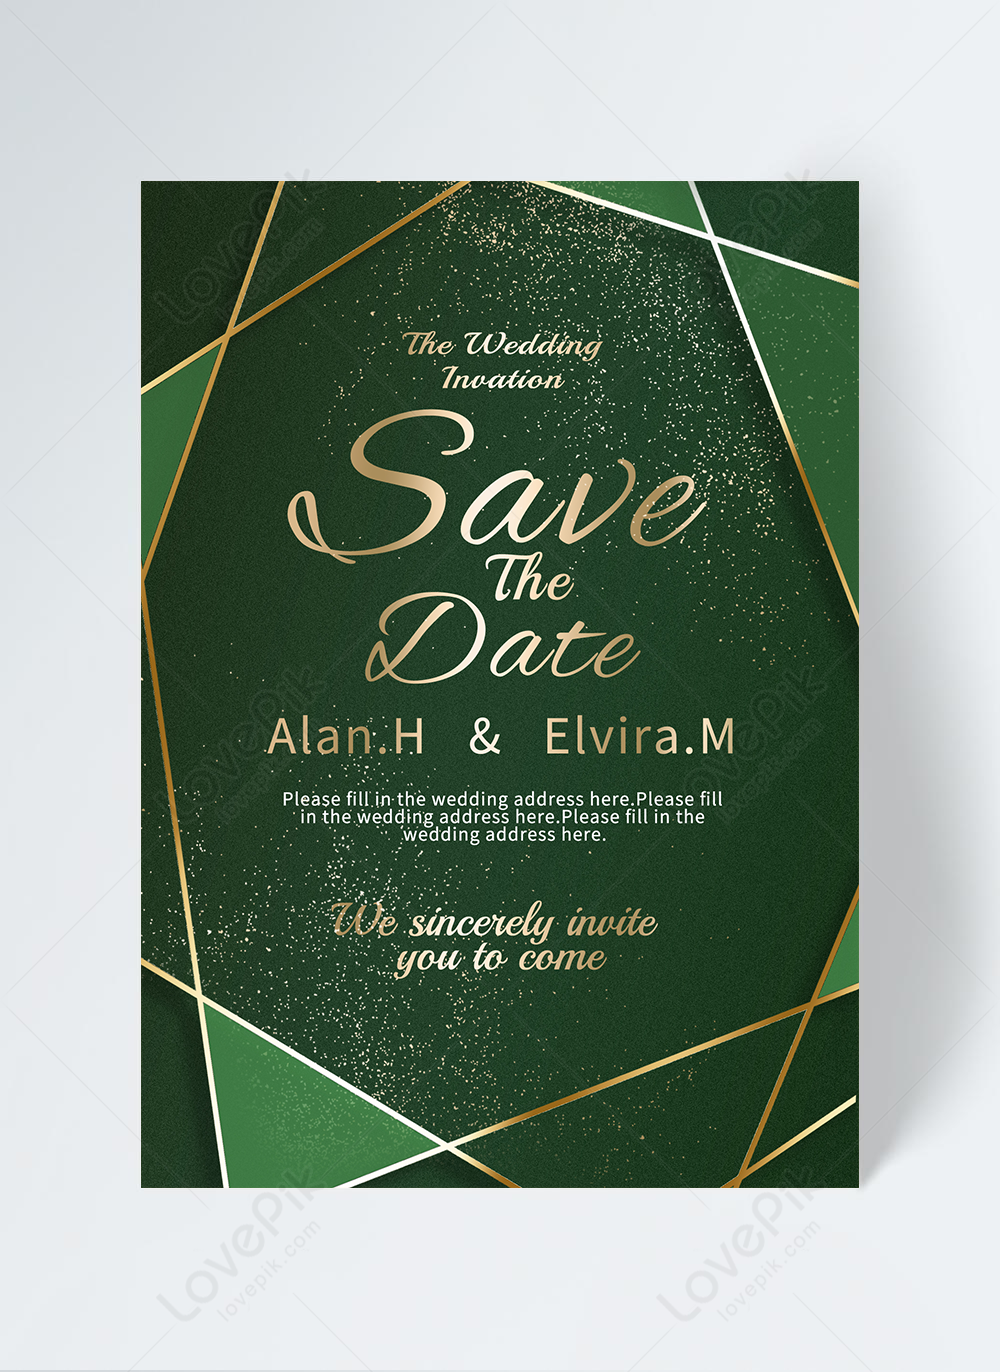 Green gold pink wedding invitation golden gradient lines luxury minimalist  invitation template image_picture free download 